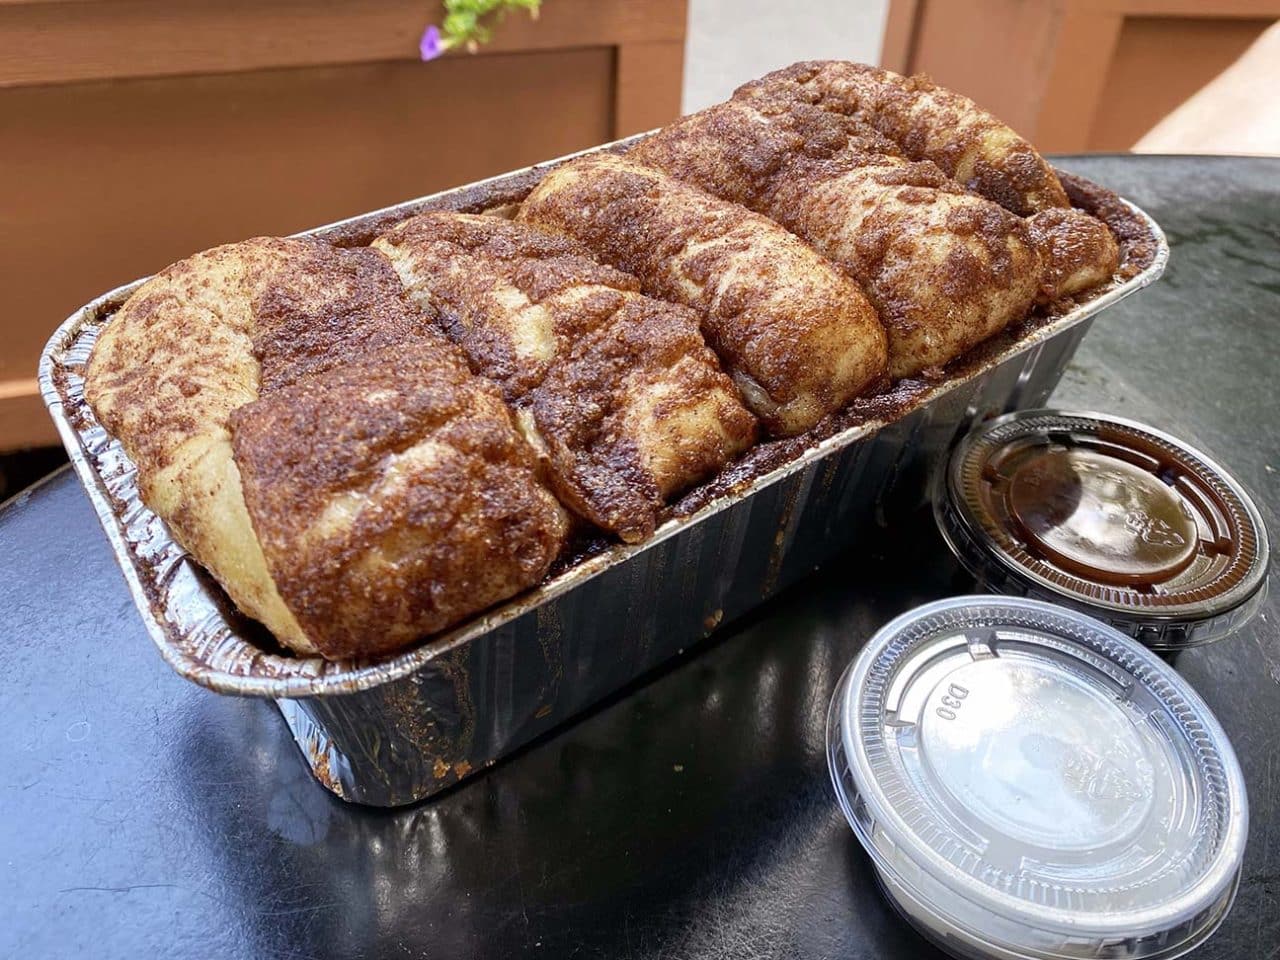 Best Things to do at Dollywood: Dolly's famous cinnamon bread is a MUST-HAVE when visiting Dollywood.